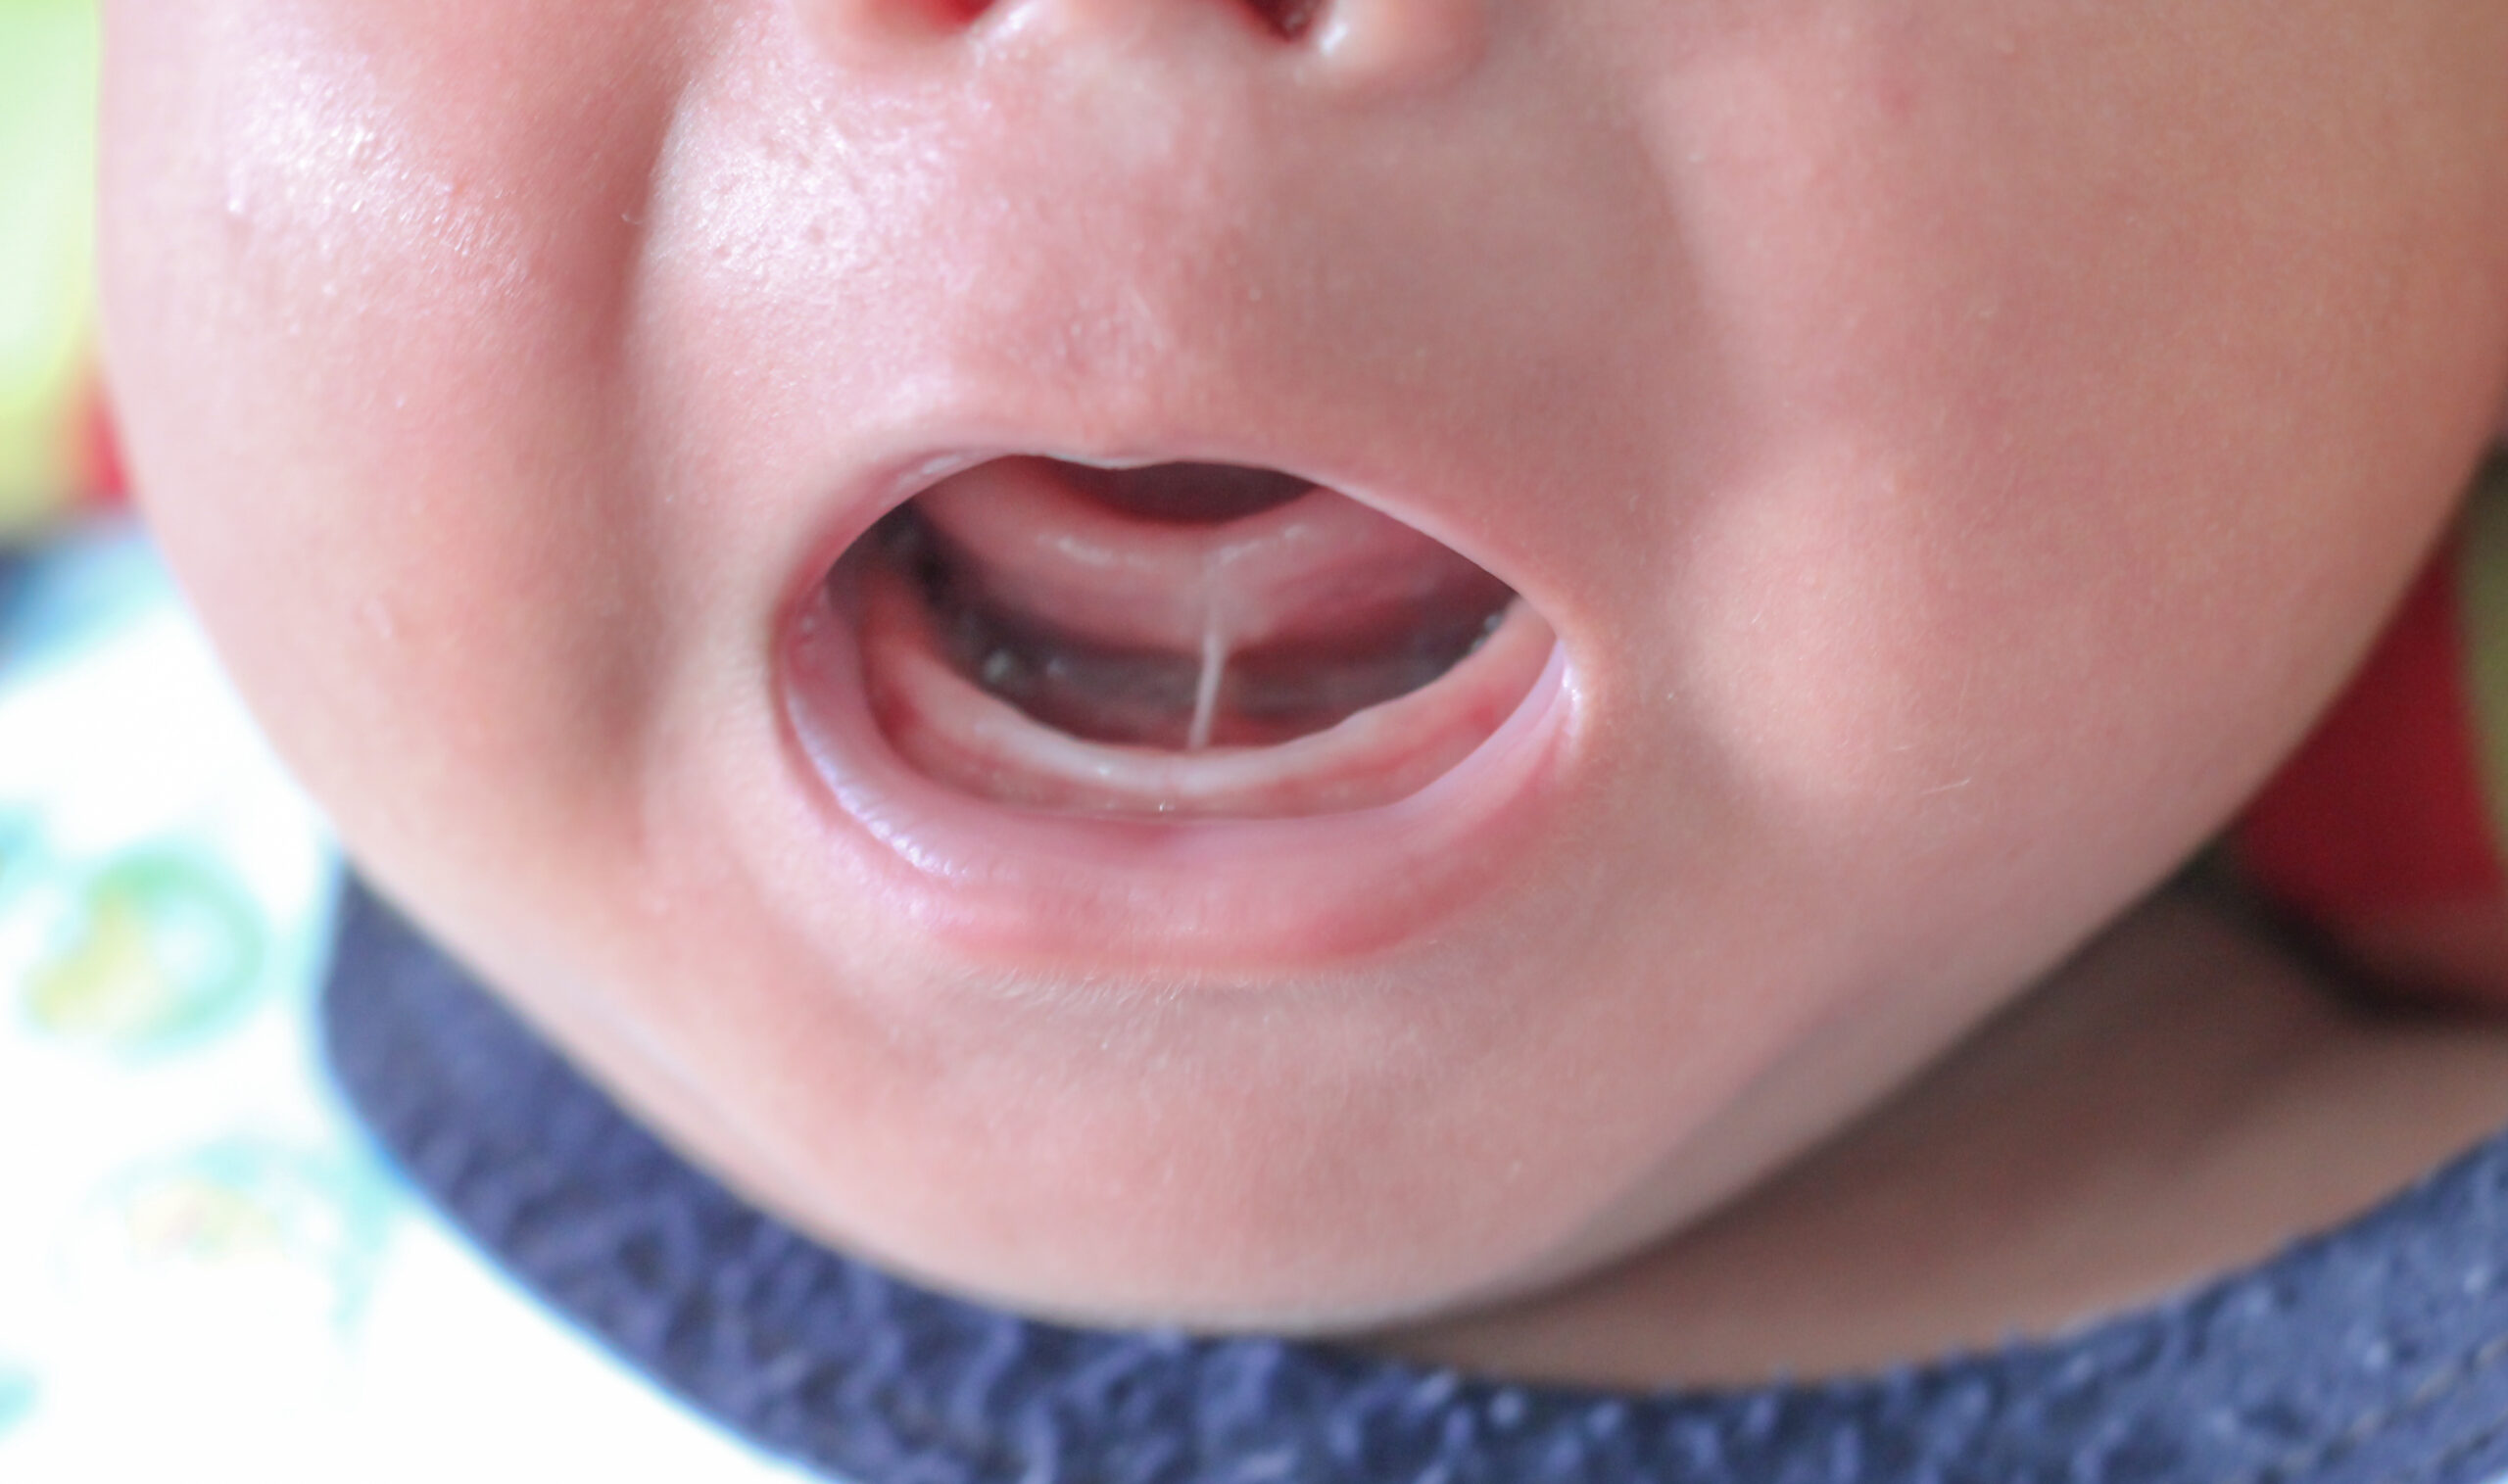 Tongue tie patient. A baby opens its mouth and reveals its frenulum.